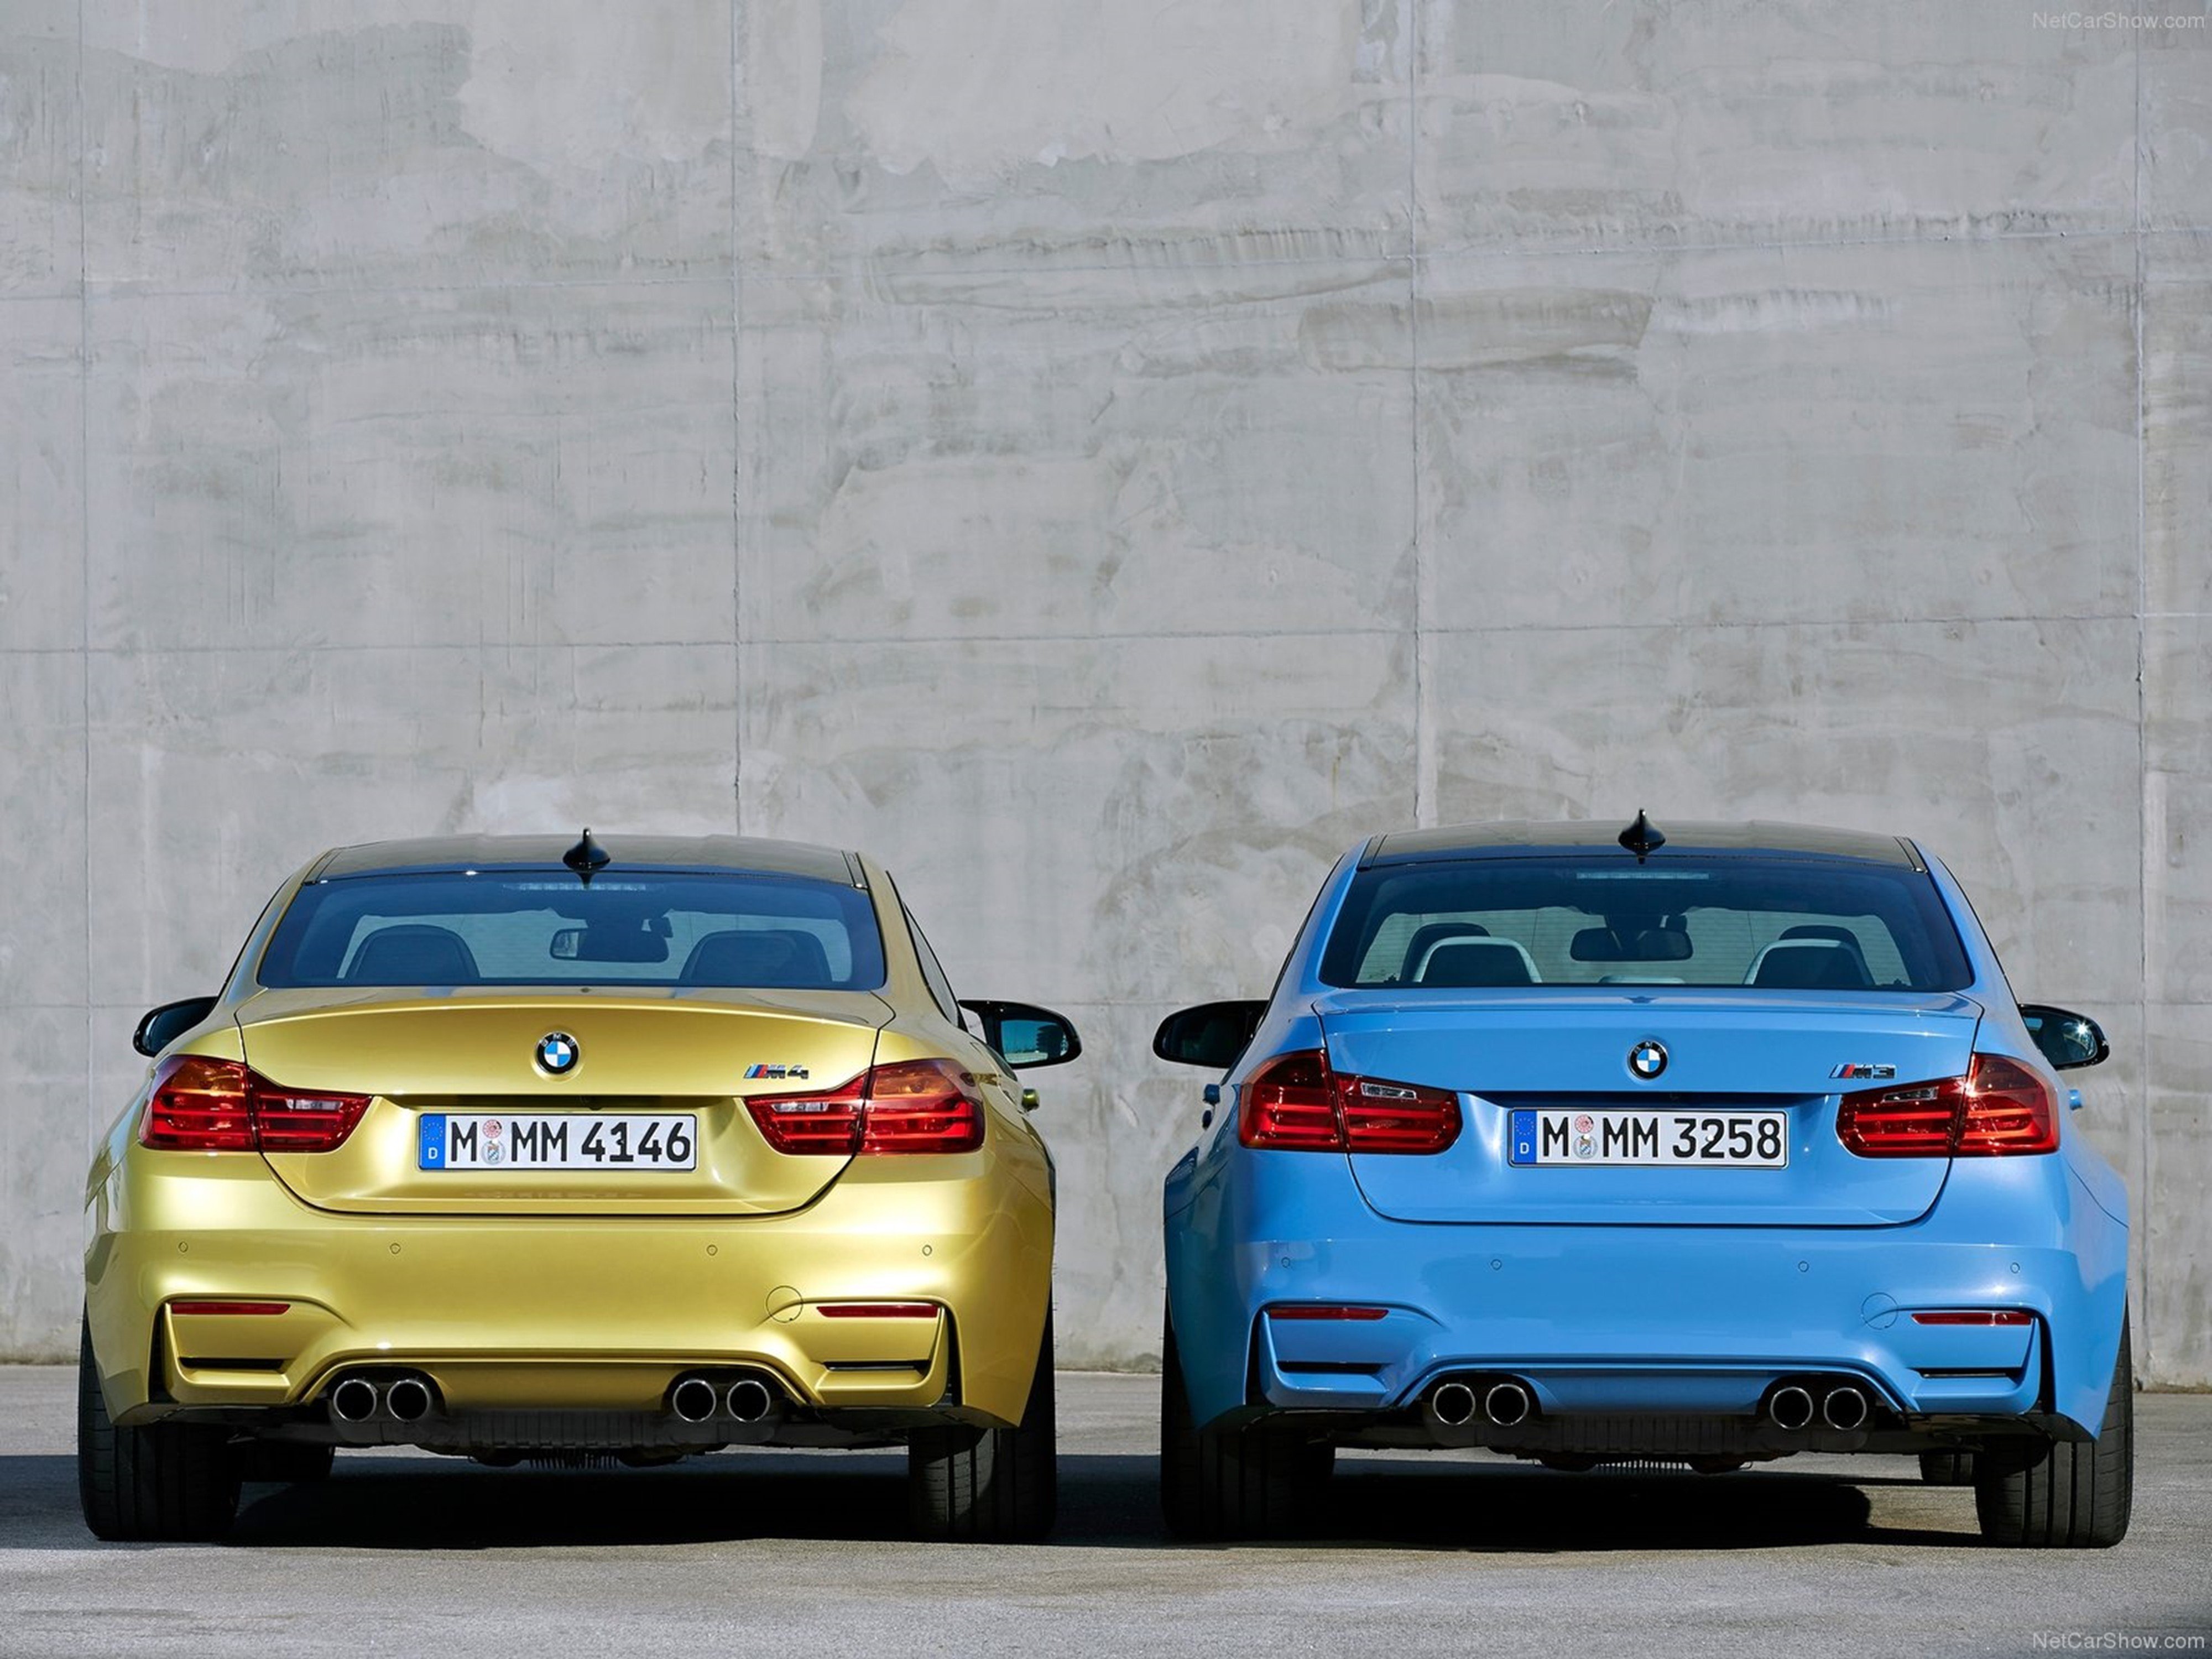 bmw, M4 coupe, 2015, Supercar, Car, Germany, Sport, 4000x3000 Wallpaper